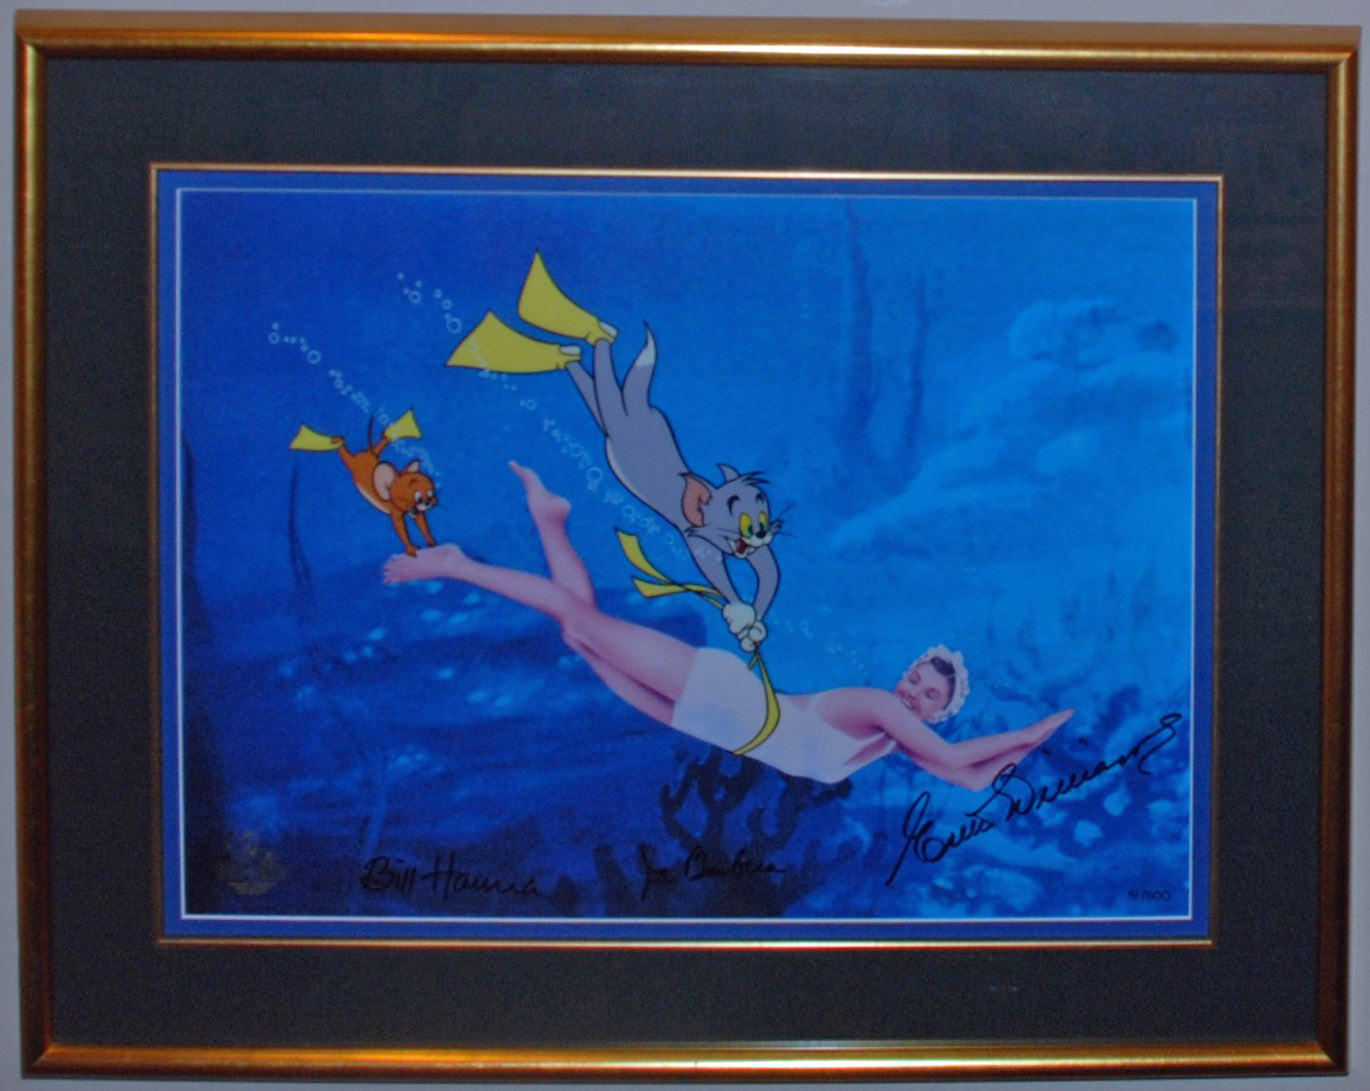 Original Hanna Barbera Tom and Jerry Limited Edition Cel, Dangerous When Wet